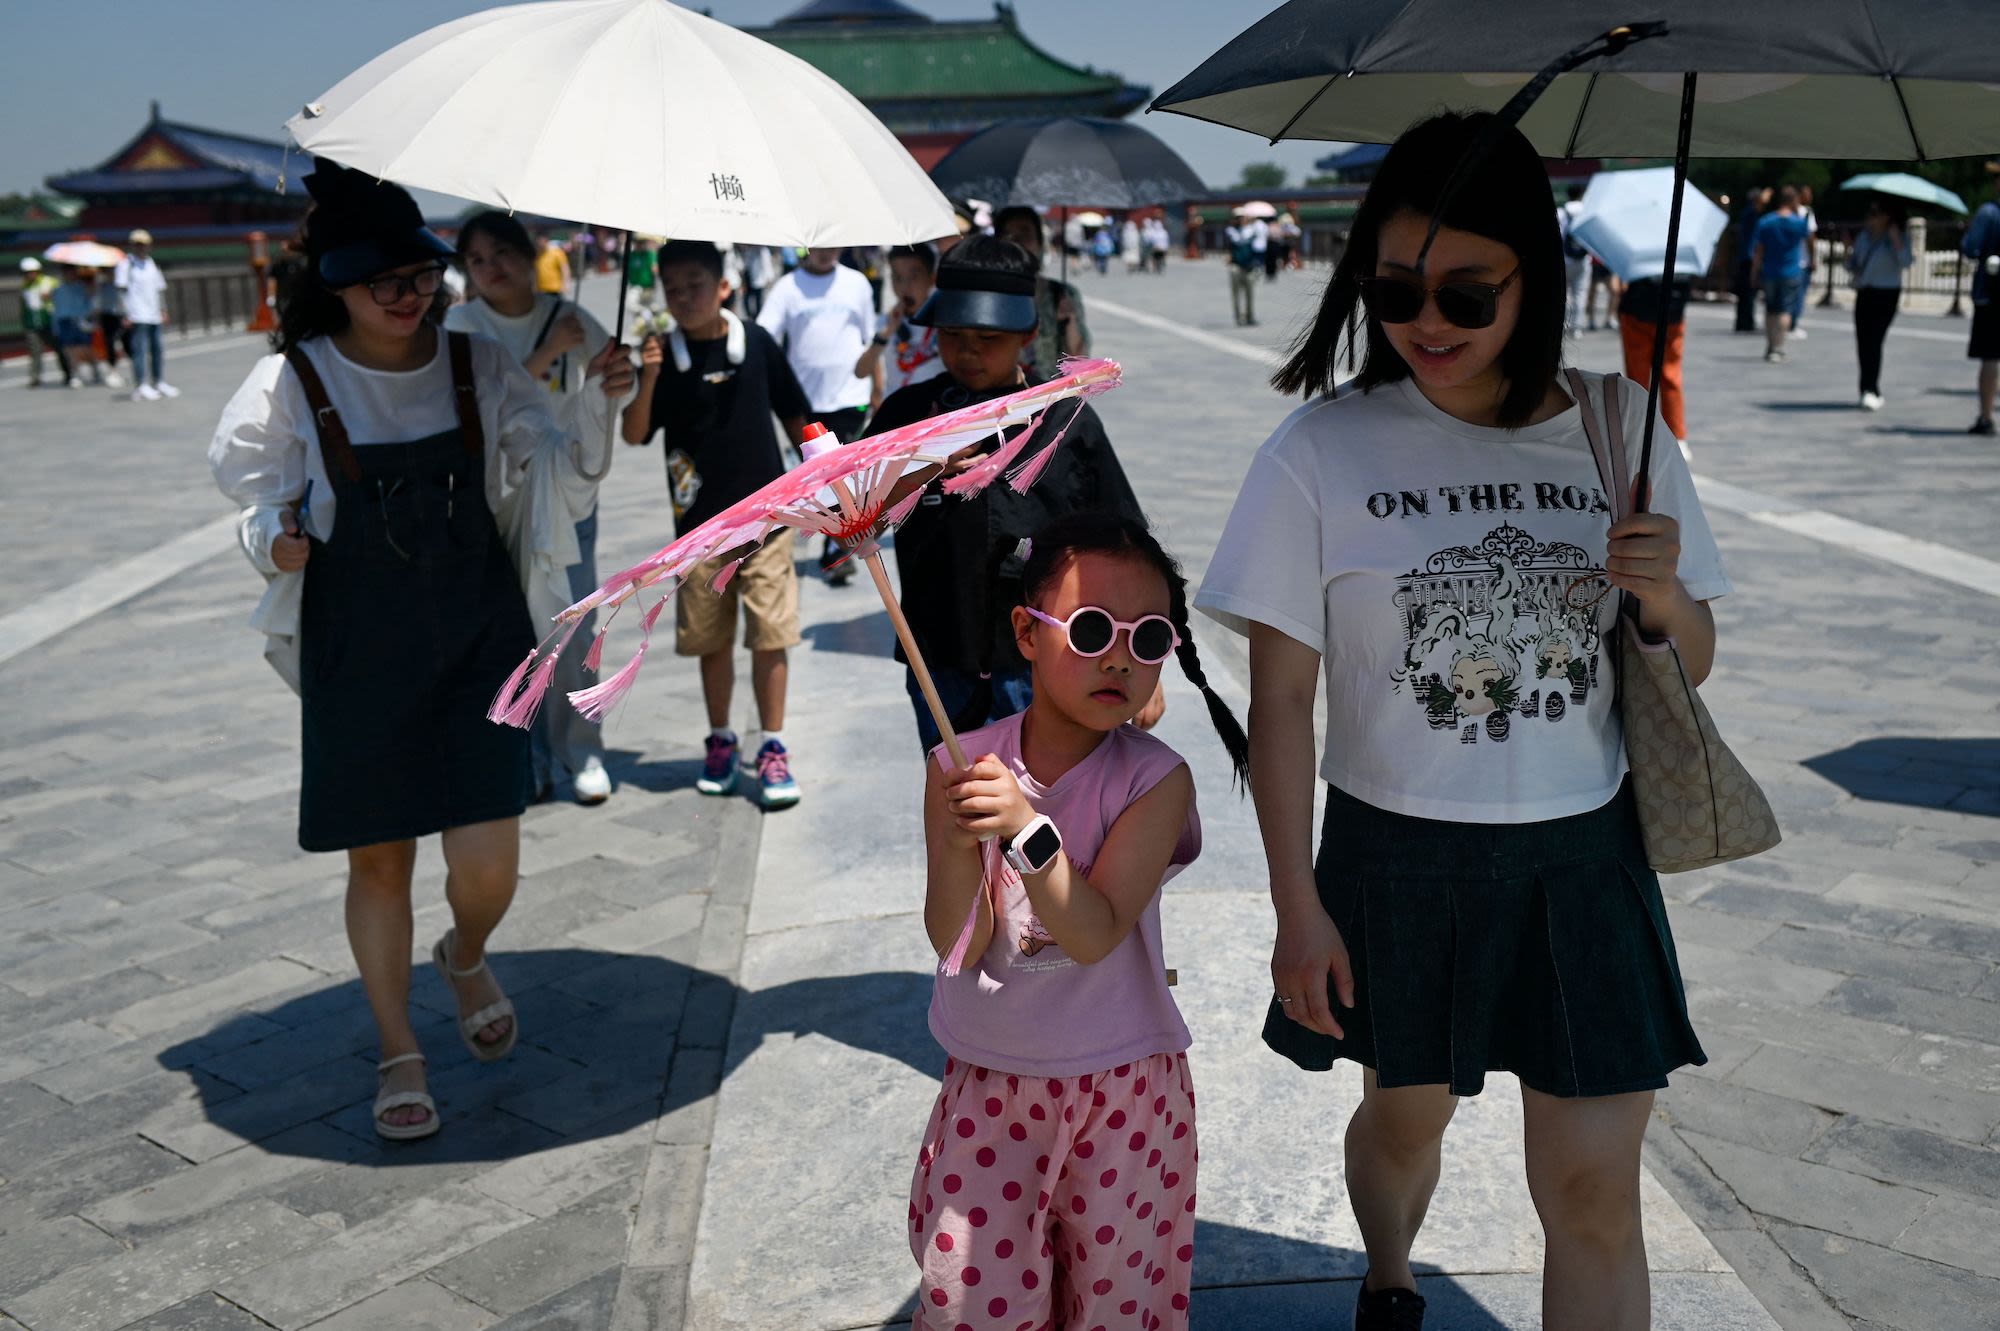 Tourists use umbrellas to shelter from the sun at the Temple of Heaven on a hot day in Beijing on June 30, 2023. (Photo by WANG Zhao / AFP) (Photo by WANG ZHAO/AFP via Getty Images)